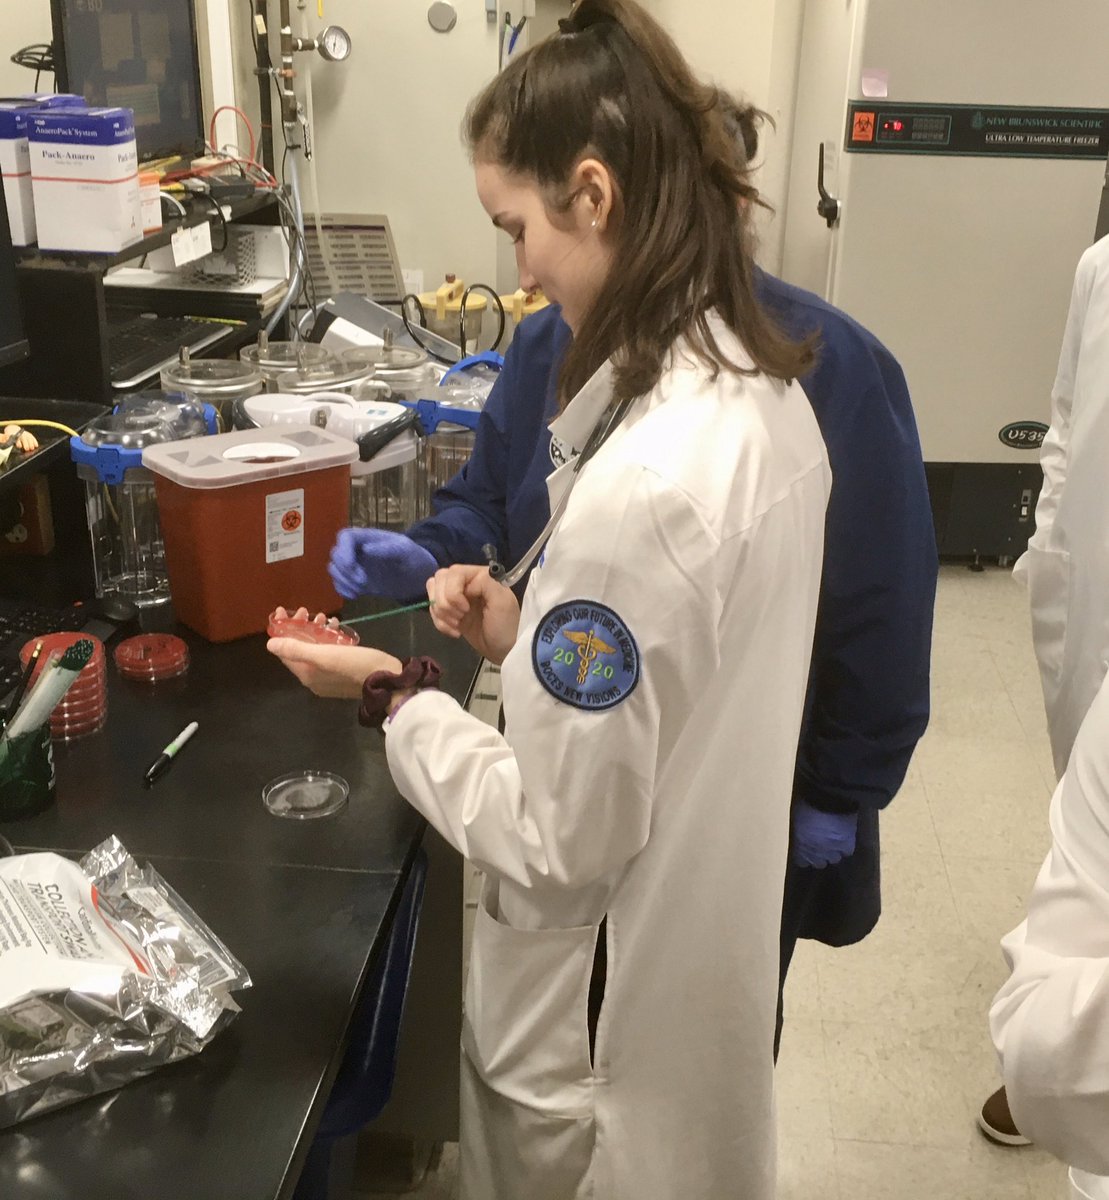 The second group of UHS students had the opportunity to spend time in various parts of lab today. Some highlights were plating bacteria, examining the brain, & flow cytometry. @BtNewVisions @CVCSDWarriors @Windsor_CSD #thisismyclassroom